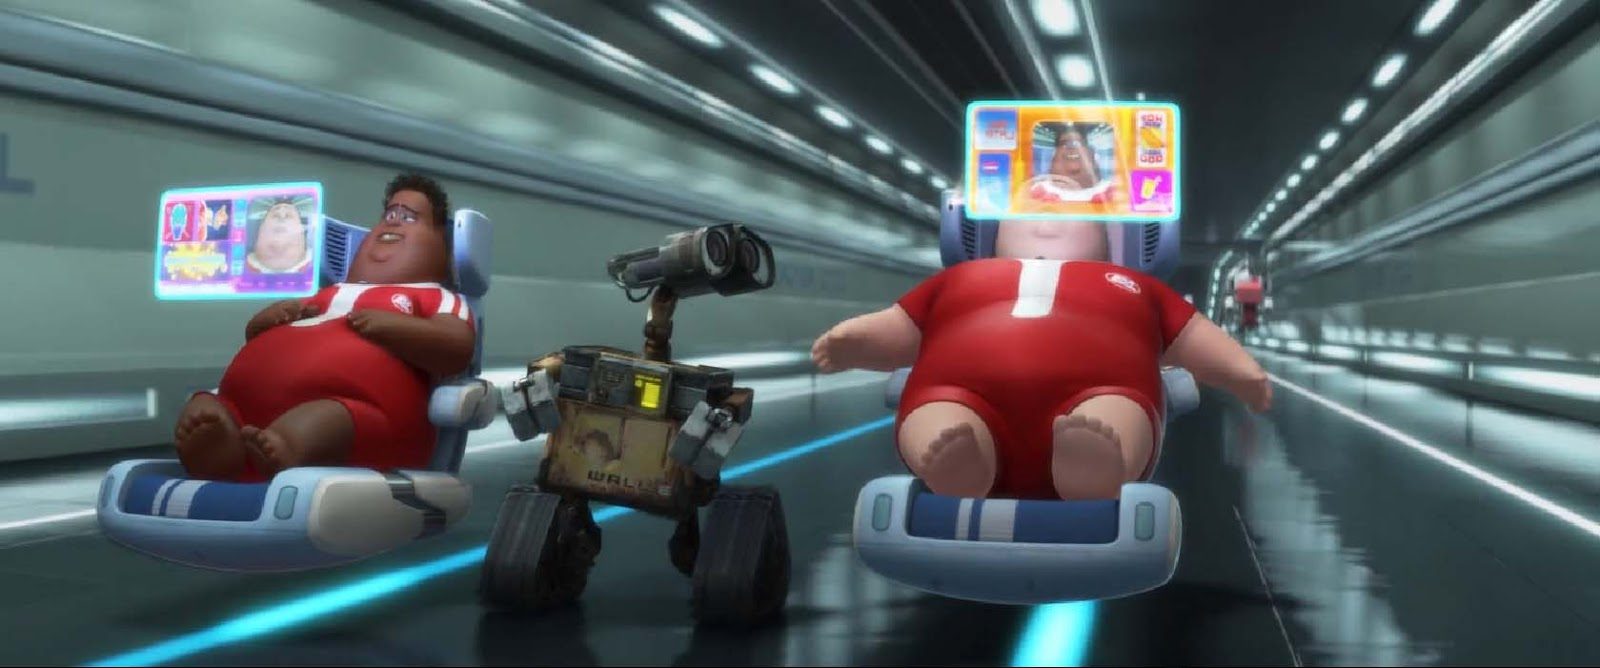 Our WALL-E Moment